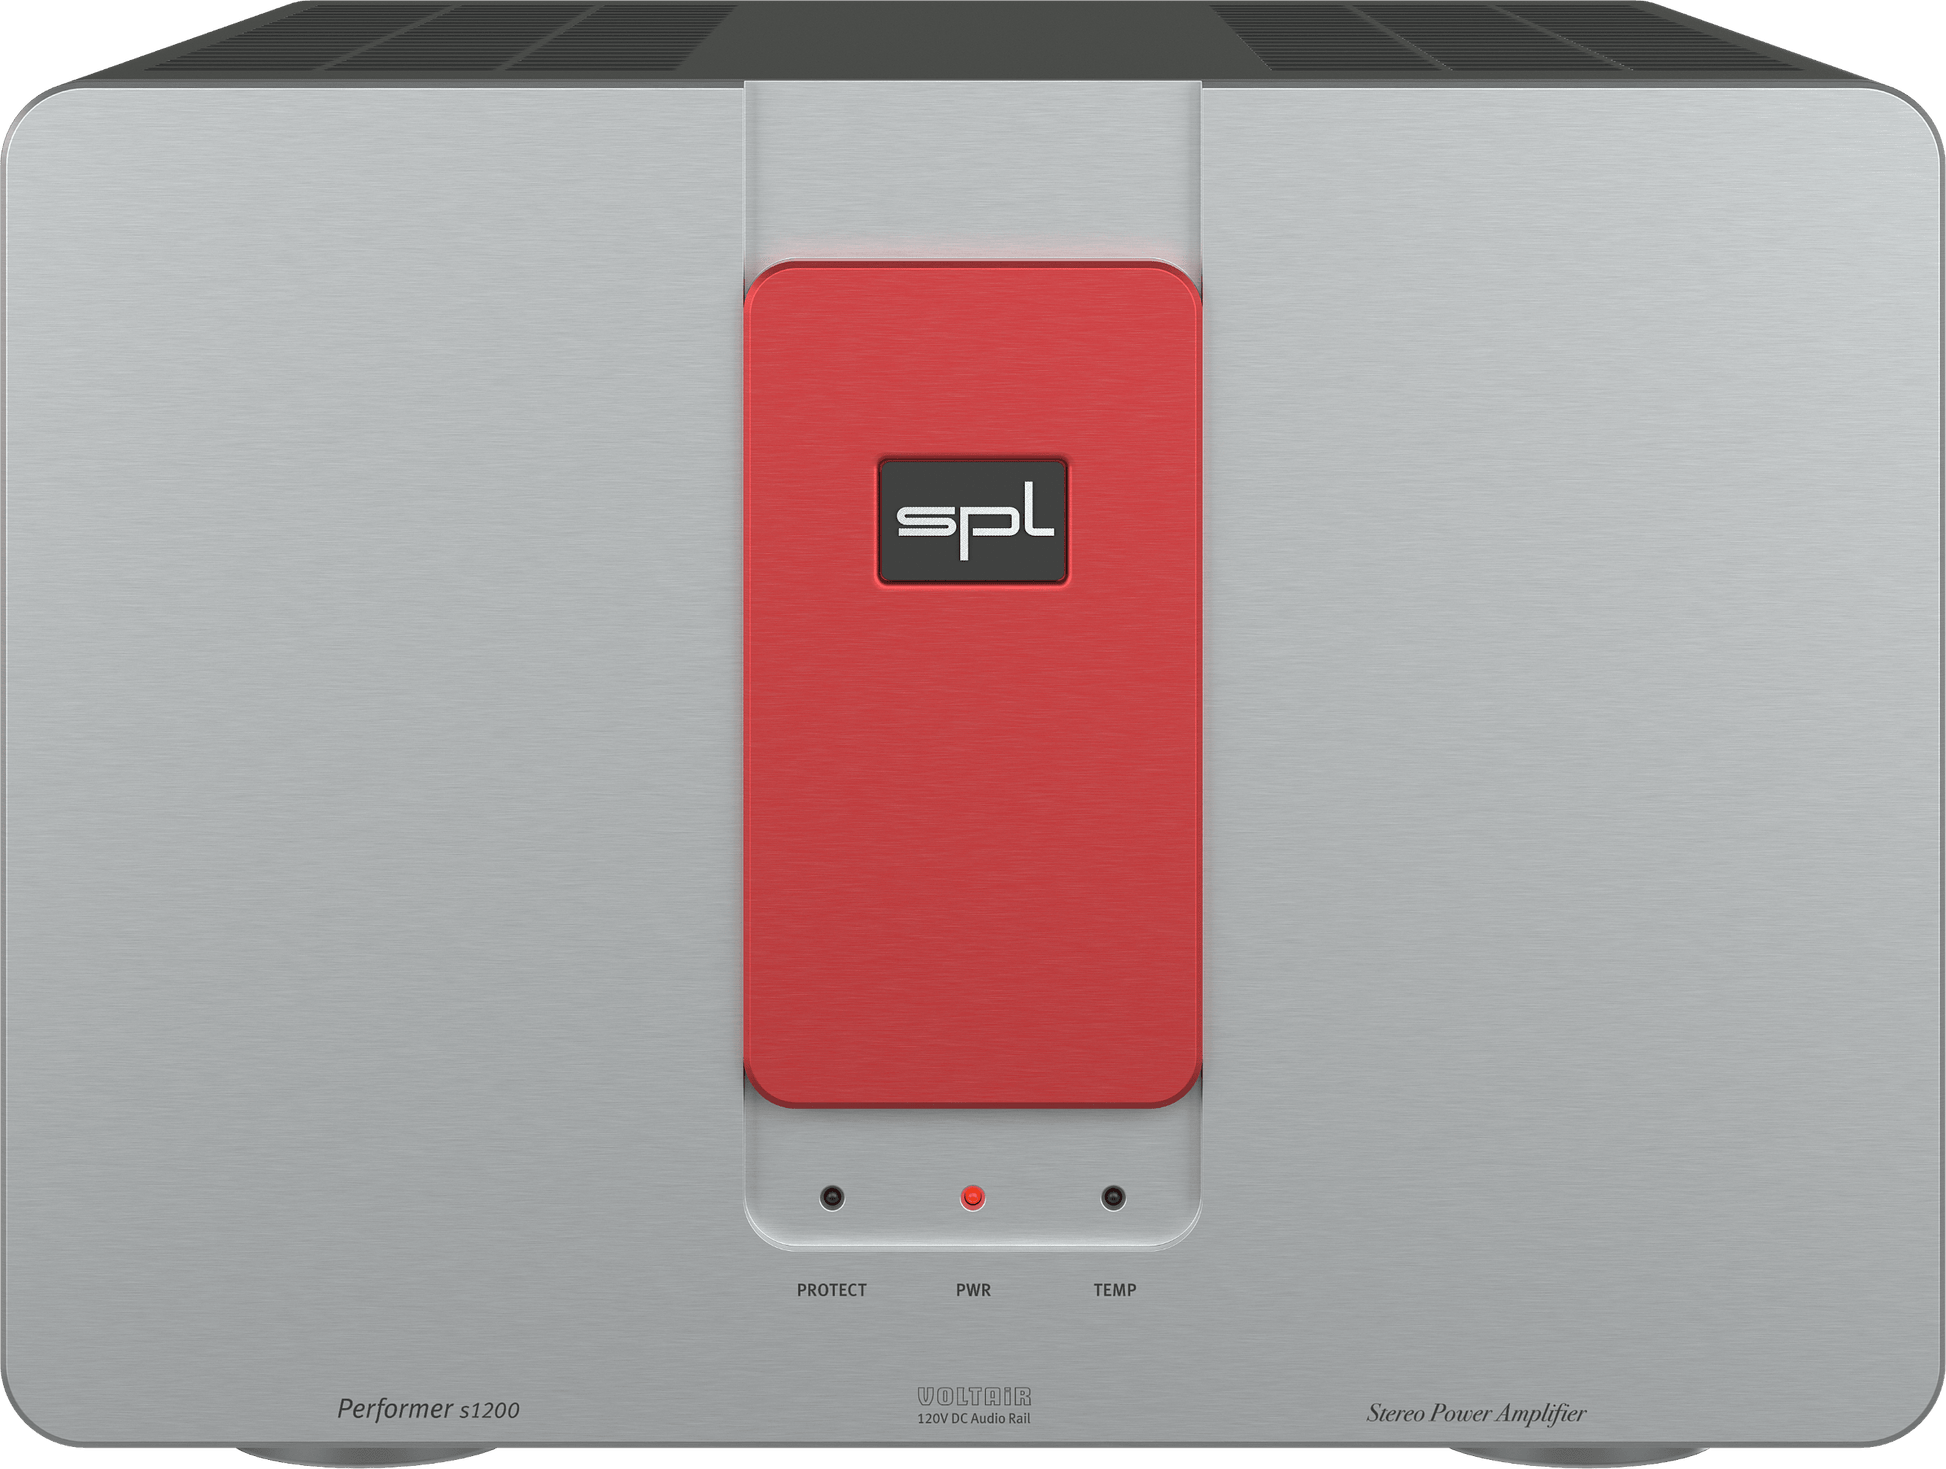 SPL Audio Performer s1200 Stereo Power Amplifier in silver with red insert